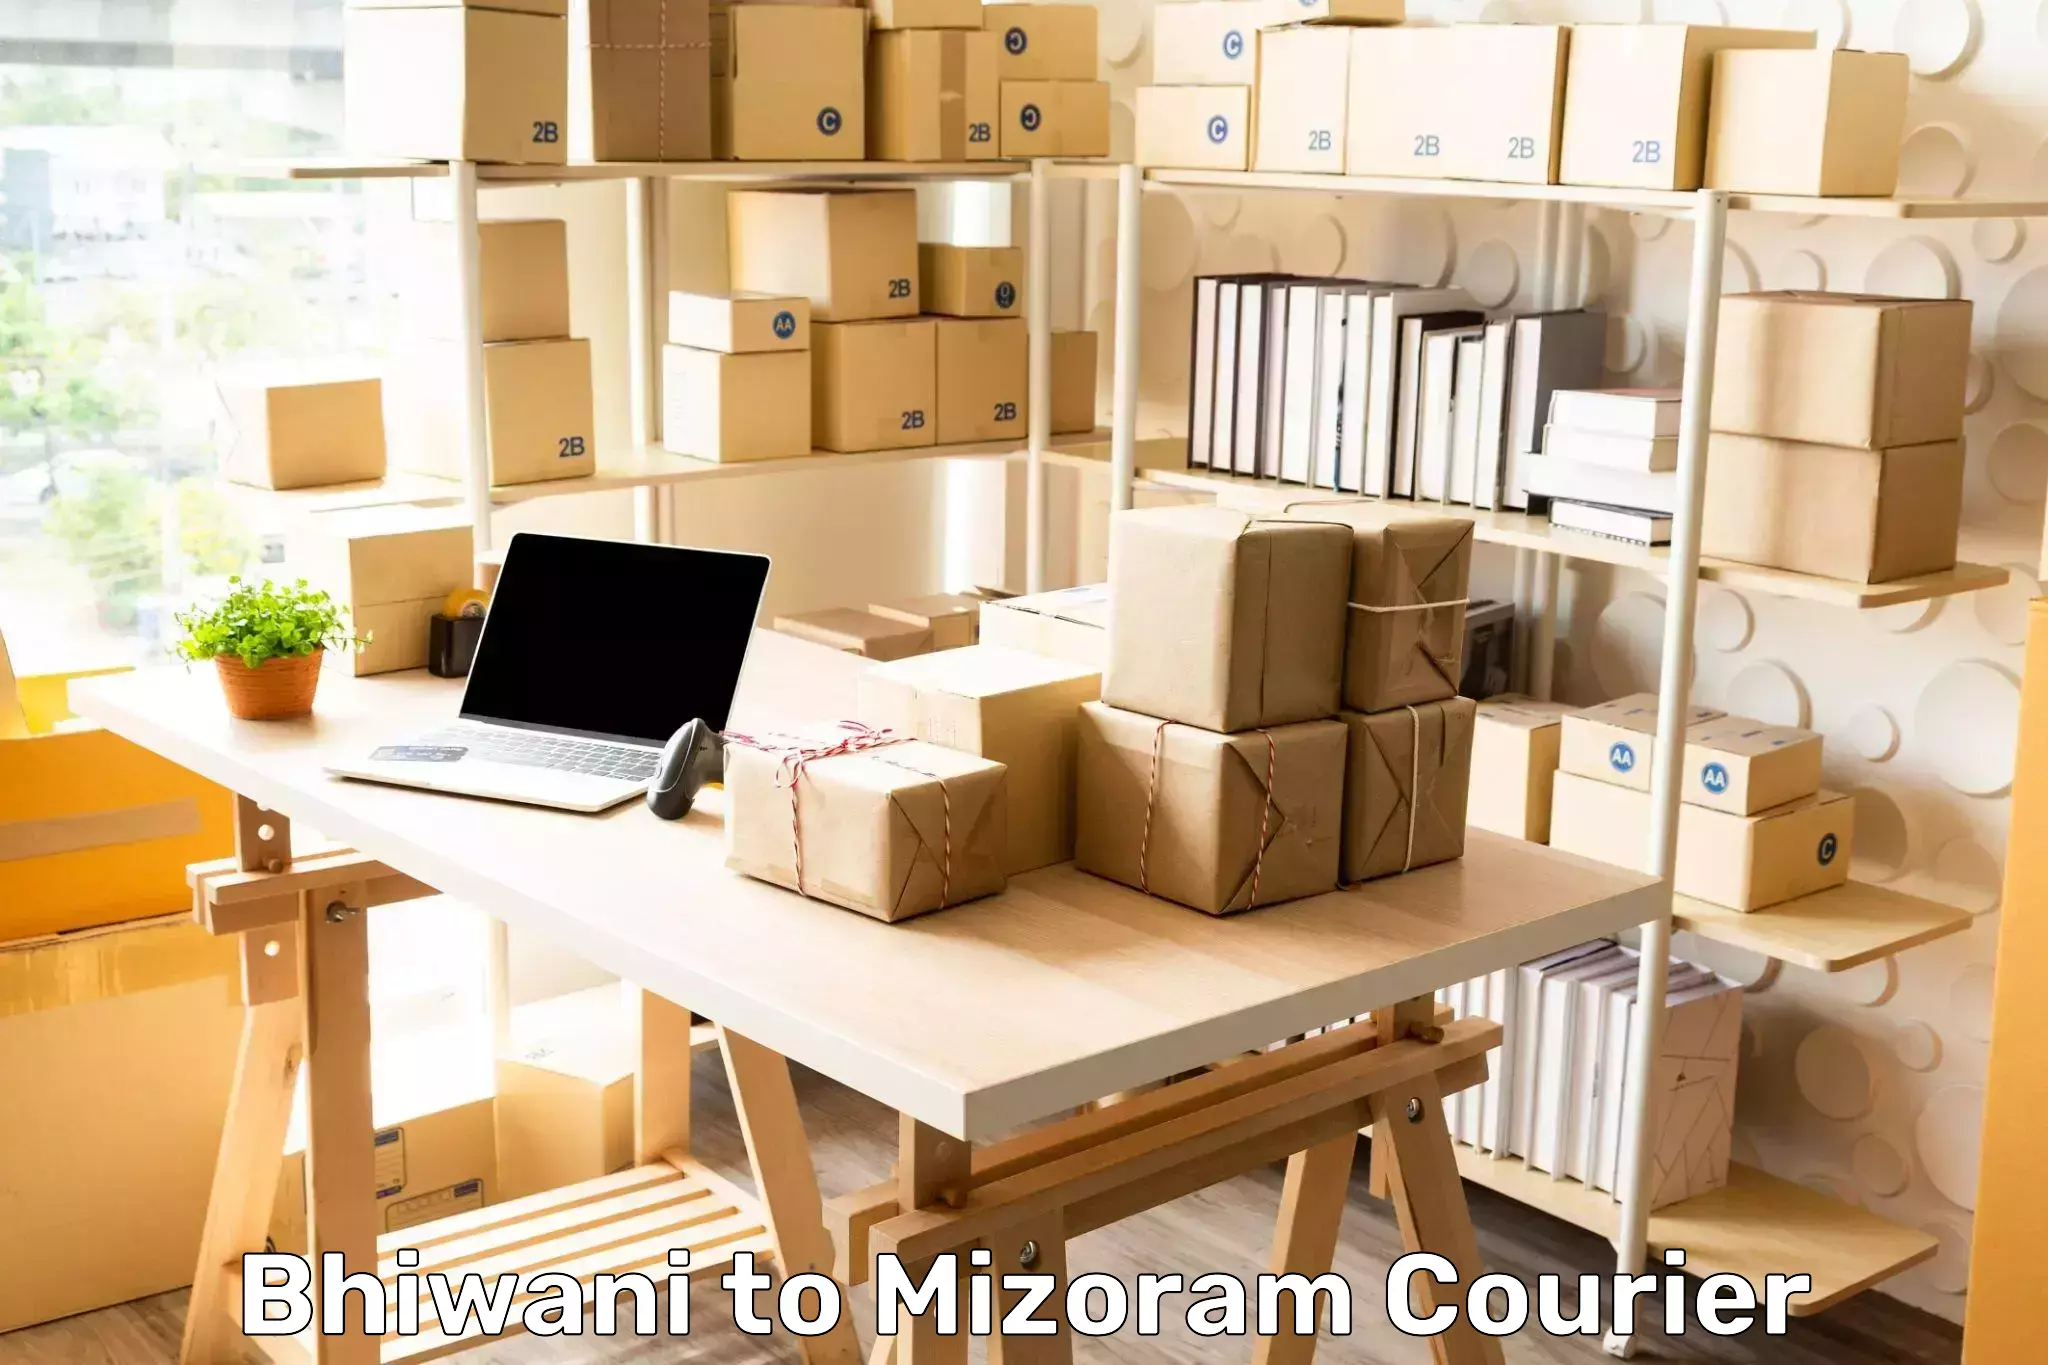 Global courier networks Bhiwani to Darlawn